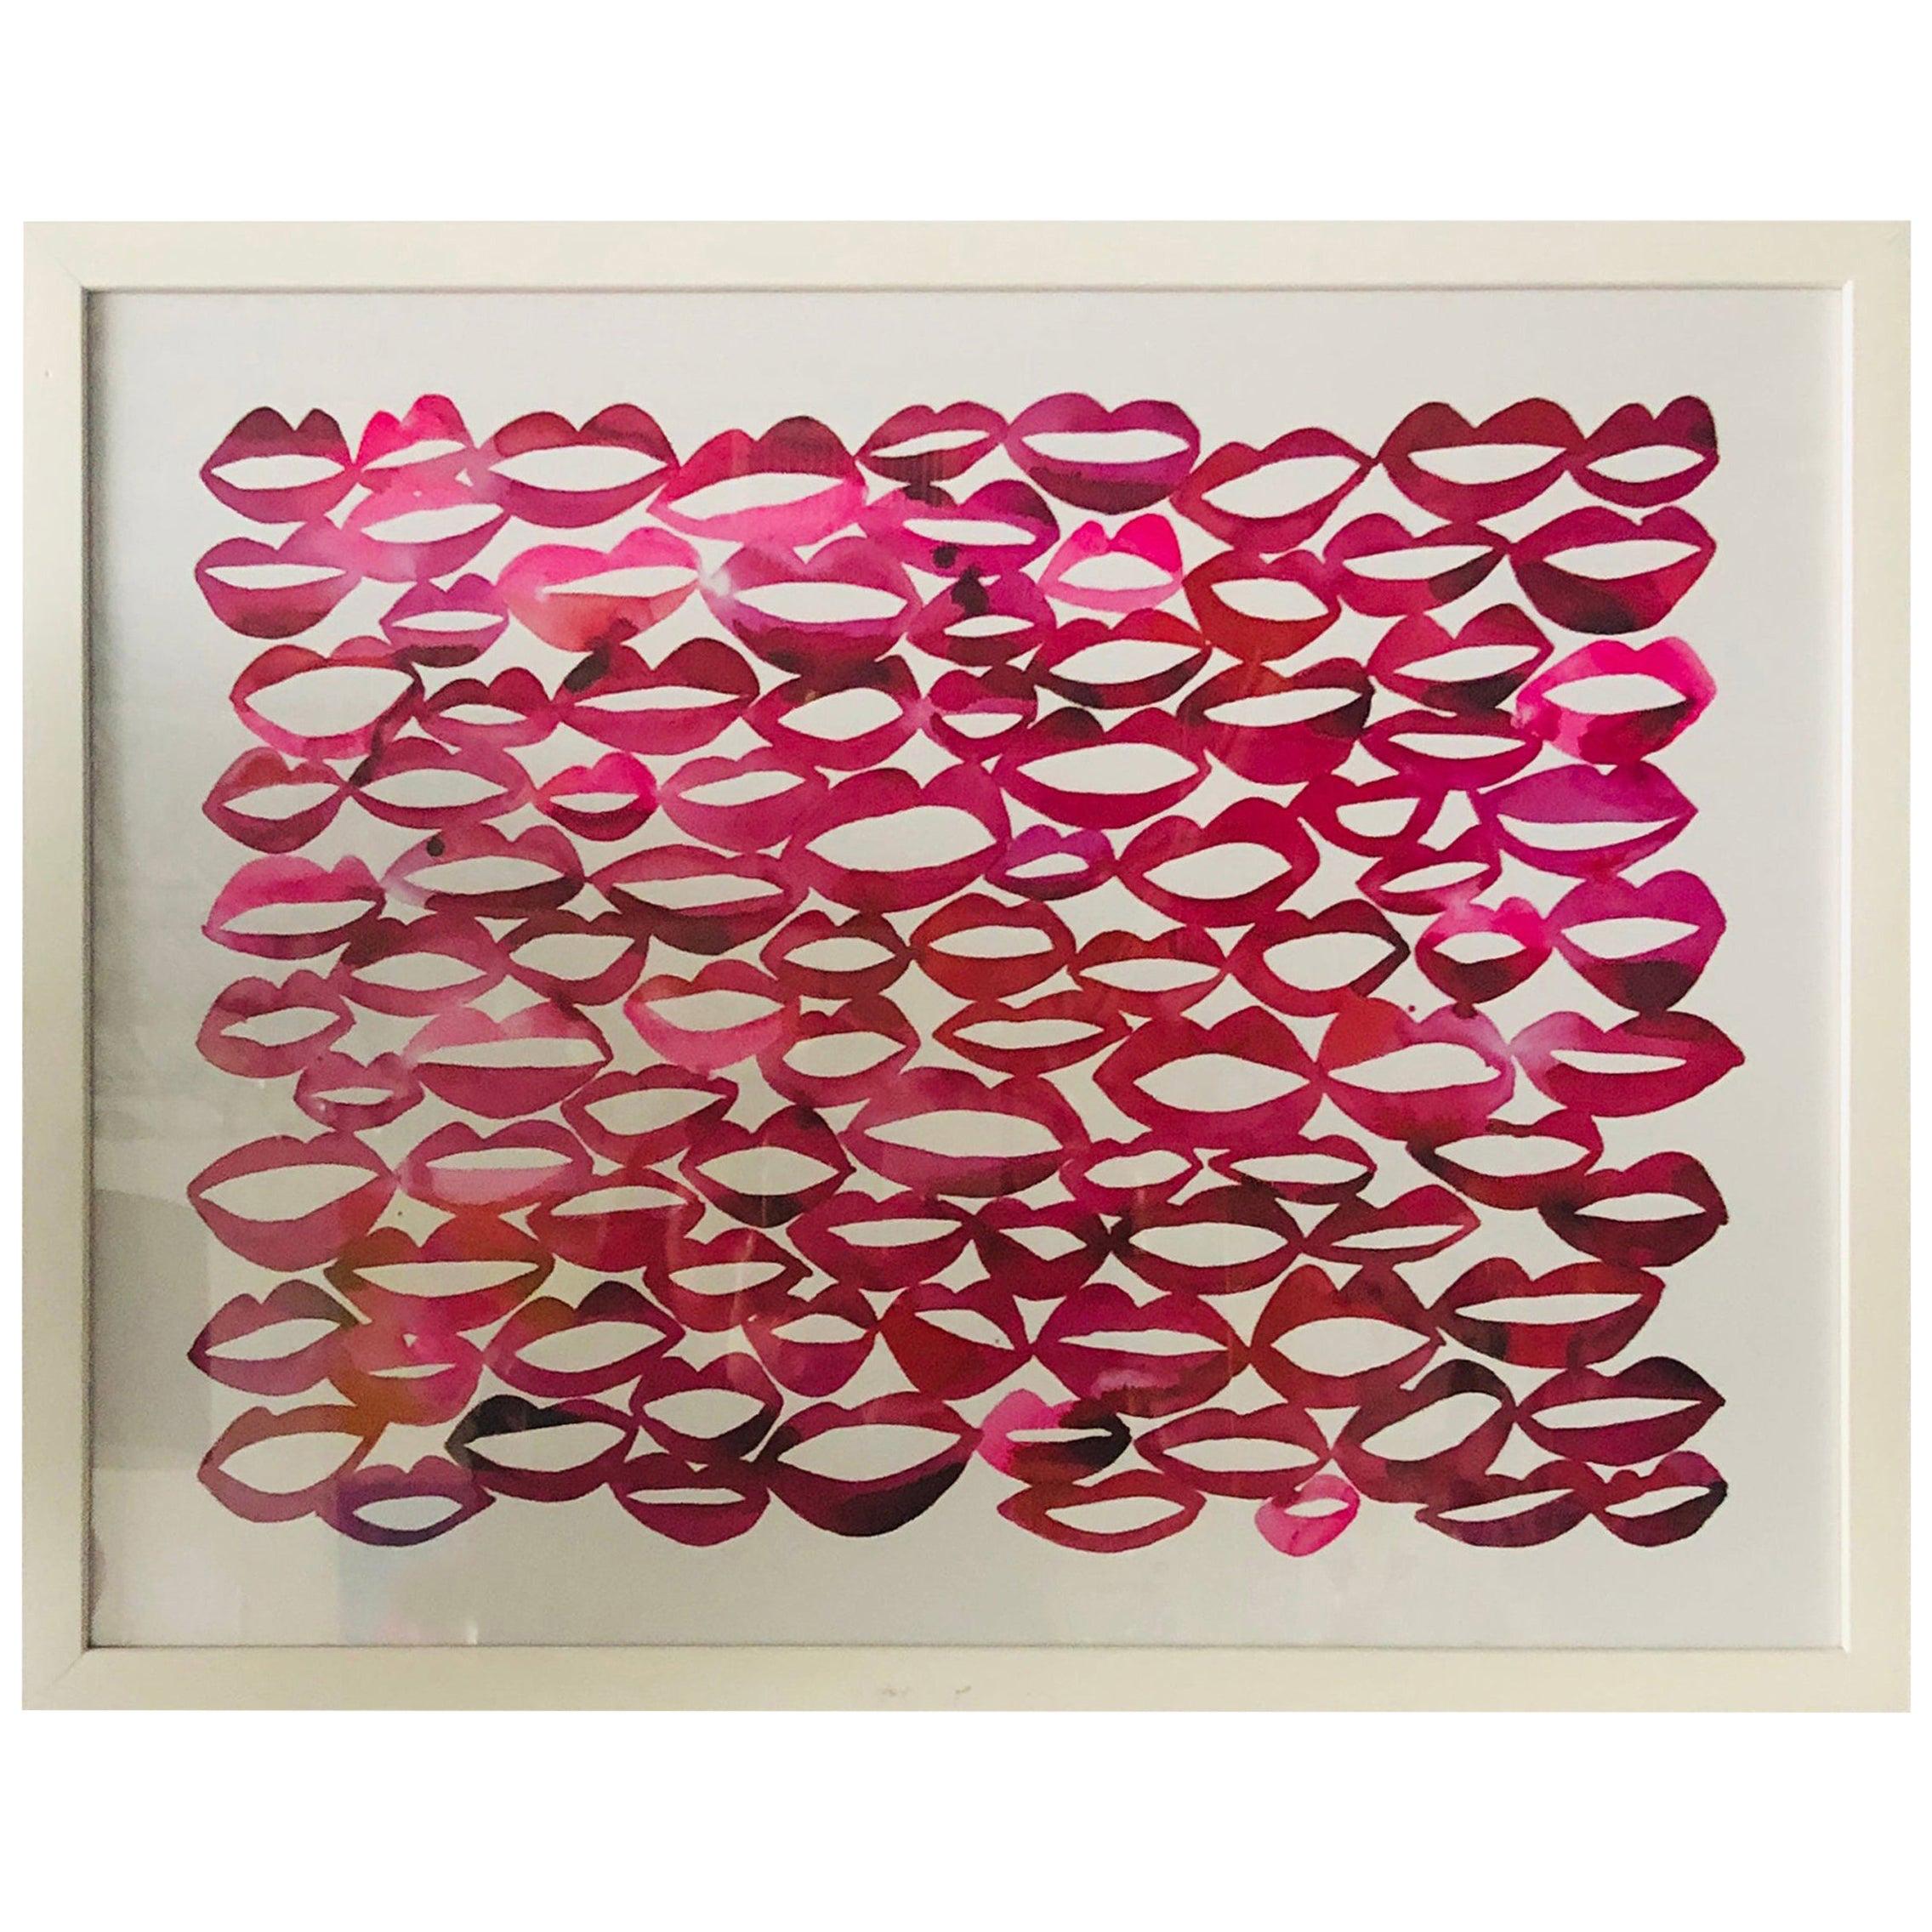 Red and Pink Contemporary Lithograph "All the Ladies" by Kate Roebuck 'Red Lips'